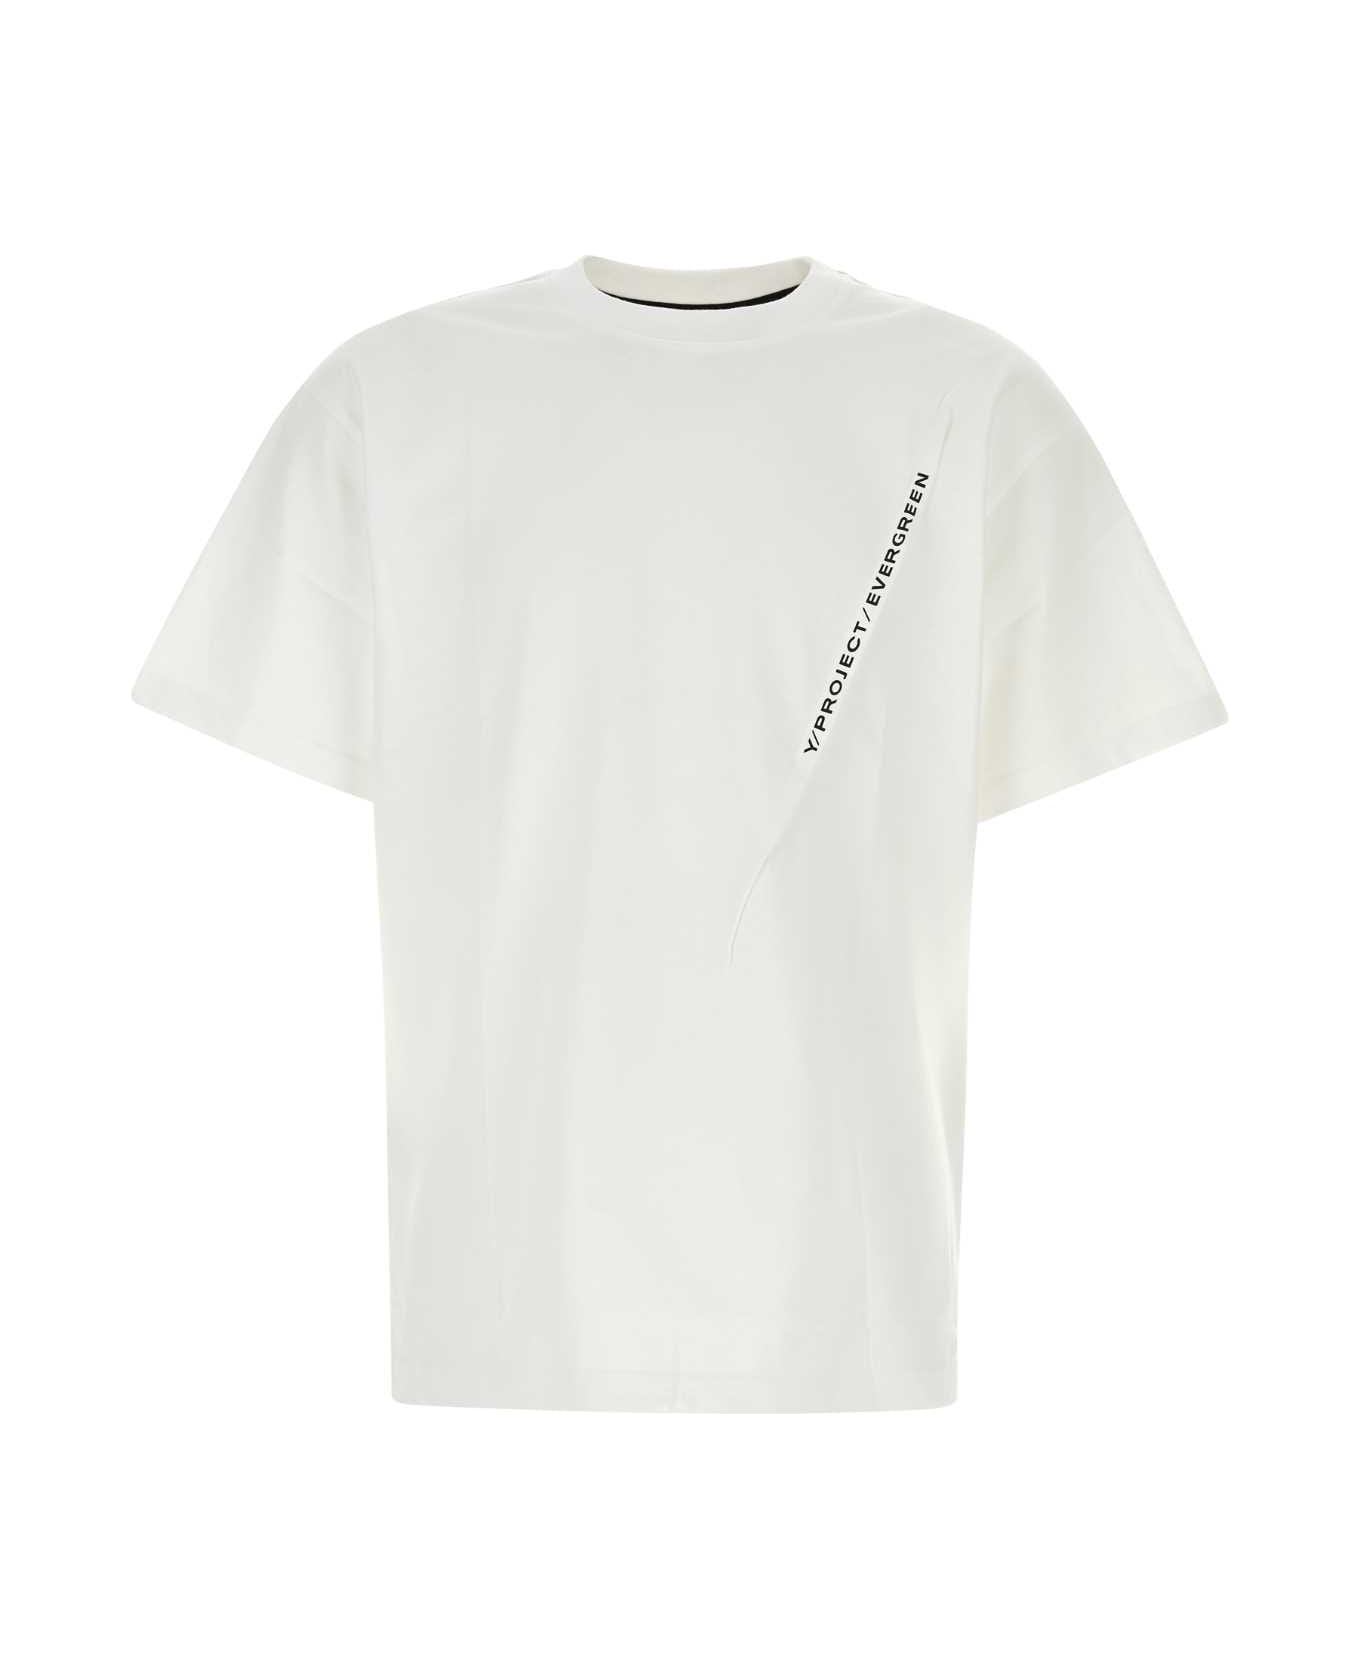 Y/Project White Cotton T-shirt - EVERGREEN OPTIC WHITE シャツ